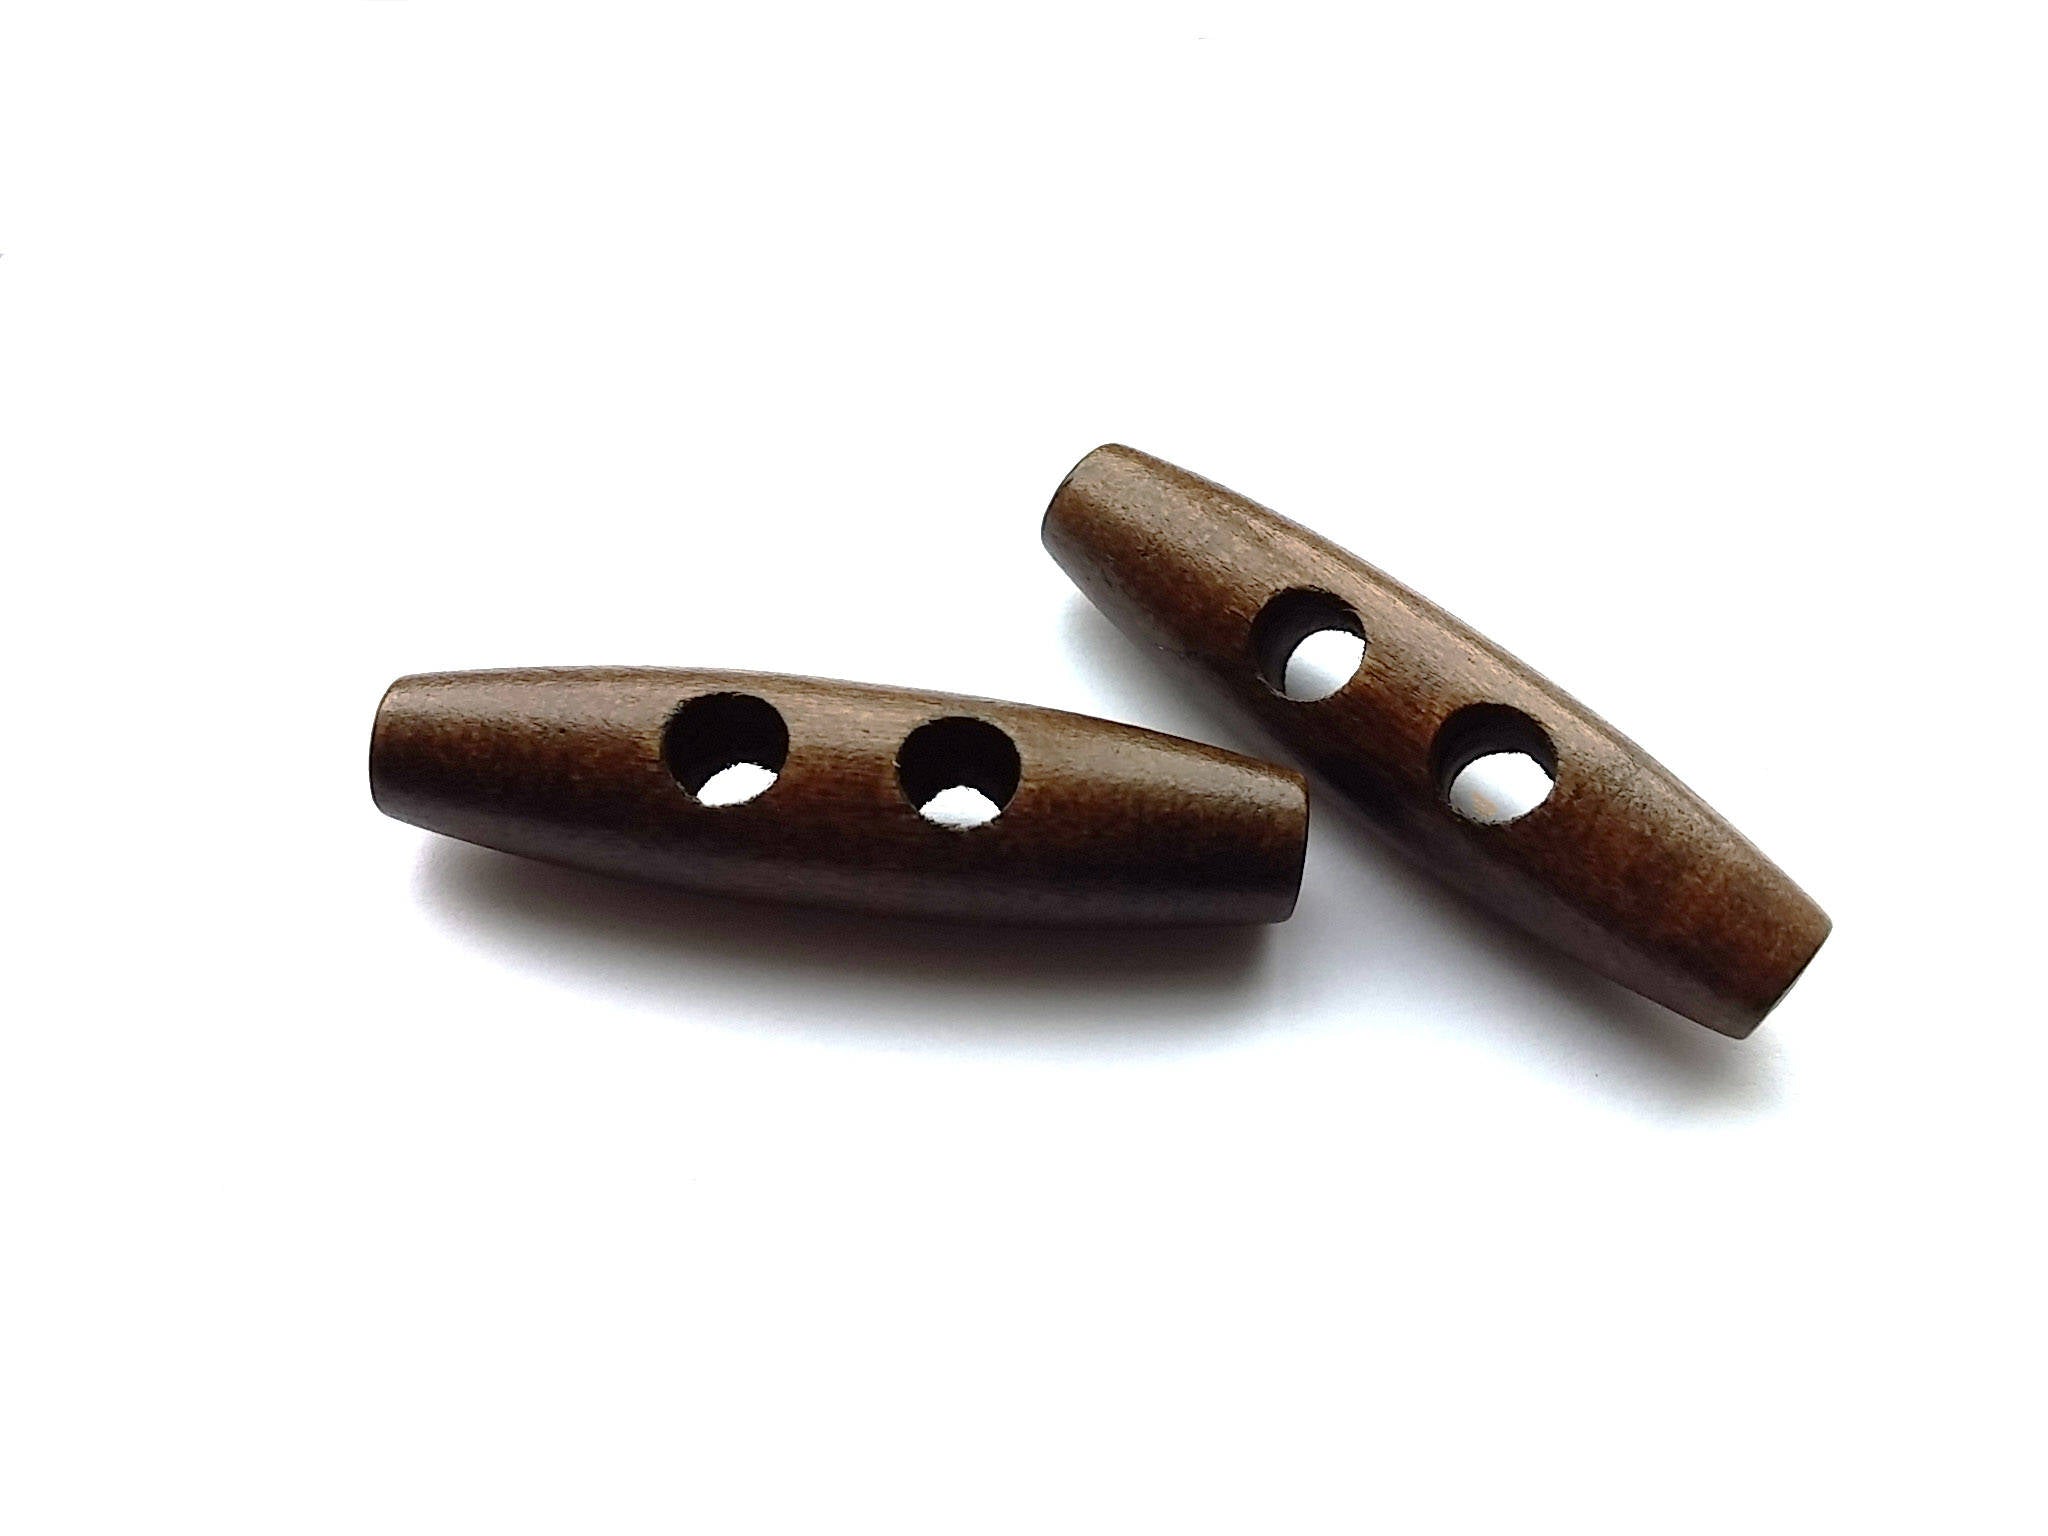 2 Big wooden toggle buttons - brown - 5cm (2")